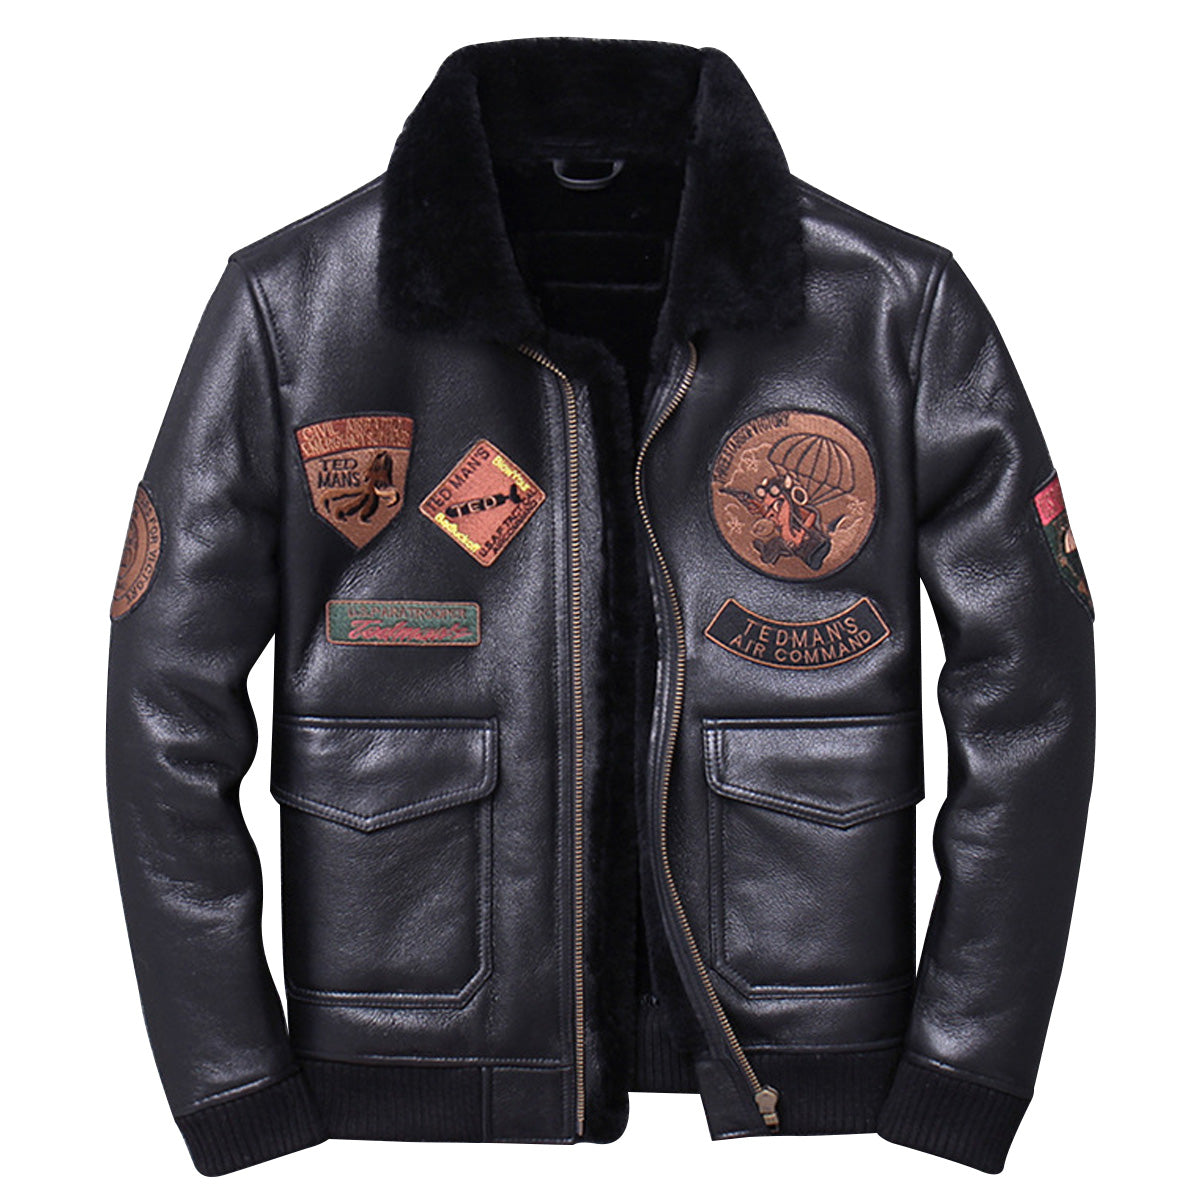 Men’s Black A2 Aviator Genuine Sheepskin Faux Fur Collar Embroidery Patchwork Air Force Military Pilot Leather Jacket